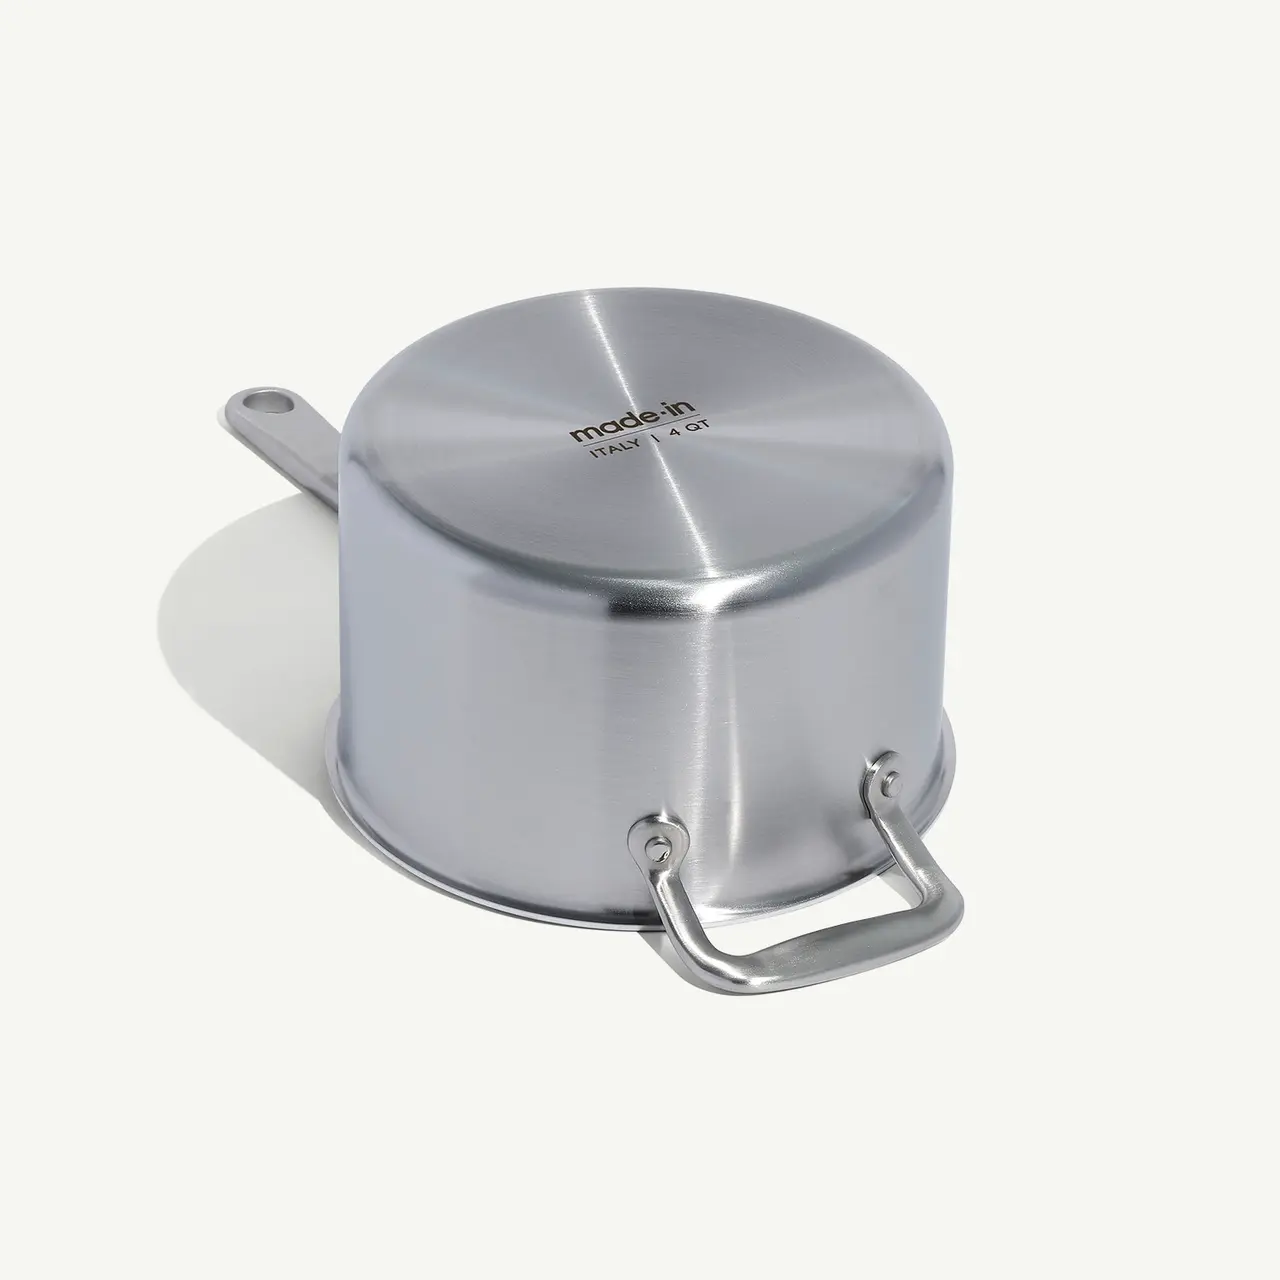 A stainless steel saucepan with a lid and a long handle casts a shadow on a light surface.